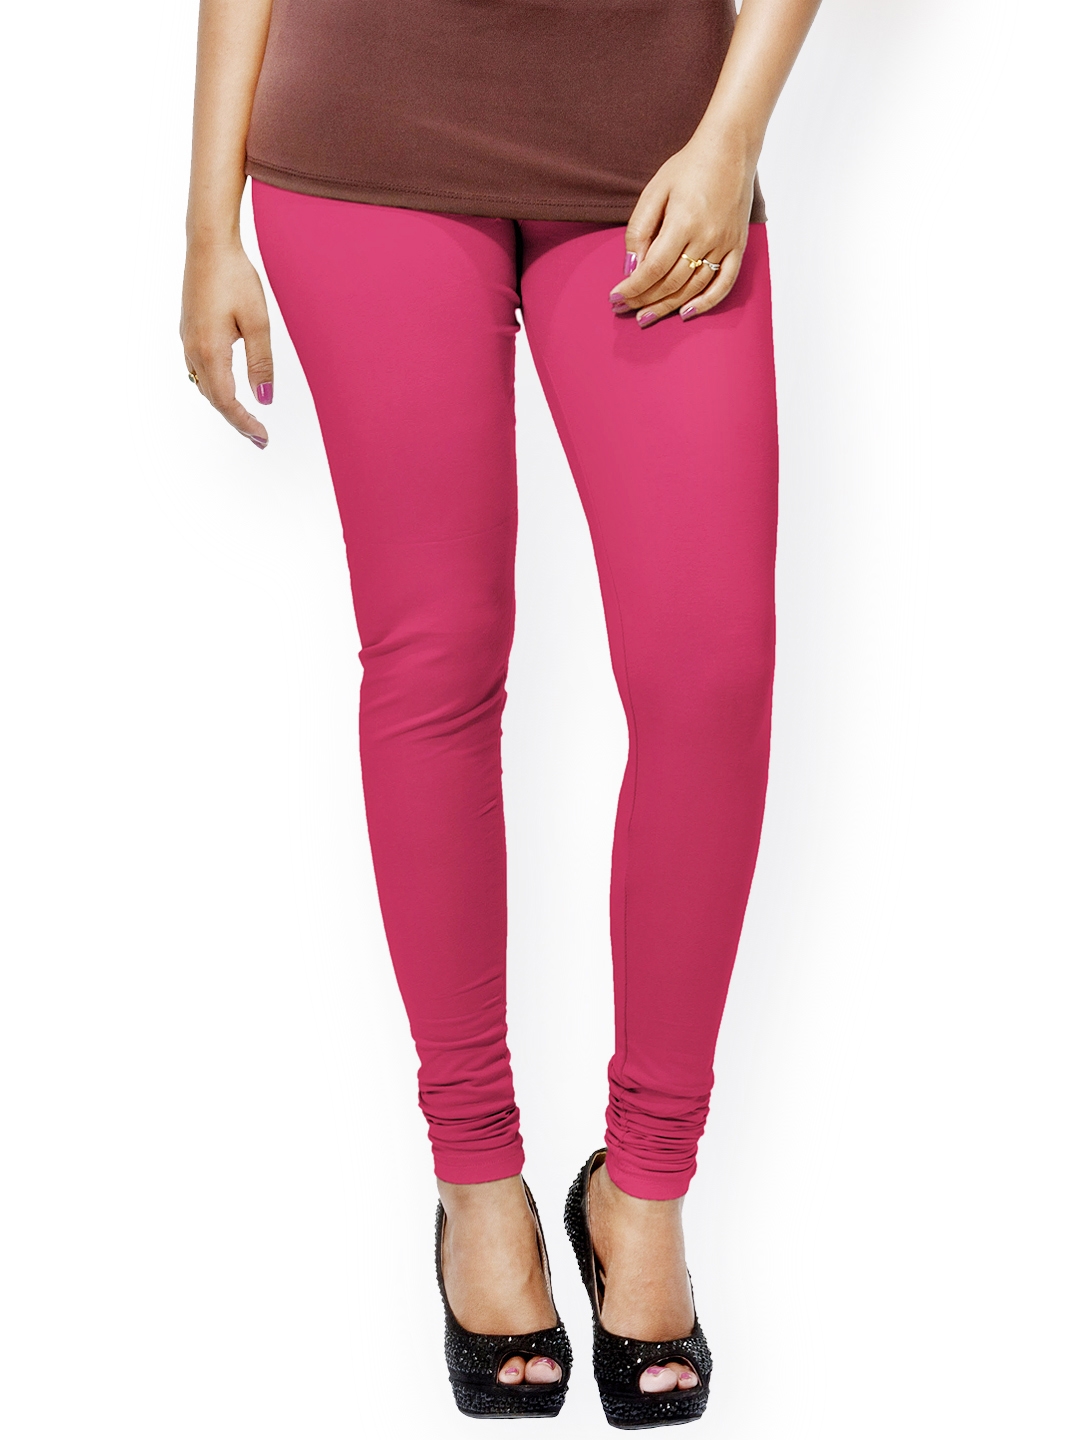 GO COLORS Women Solid Dark Pink Ankle Length Leggings : Amazon.in: Fashion-nextbuild.com.vn